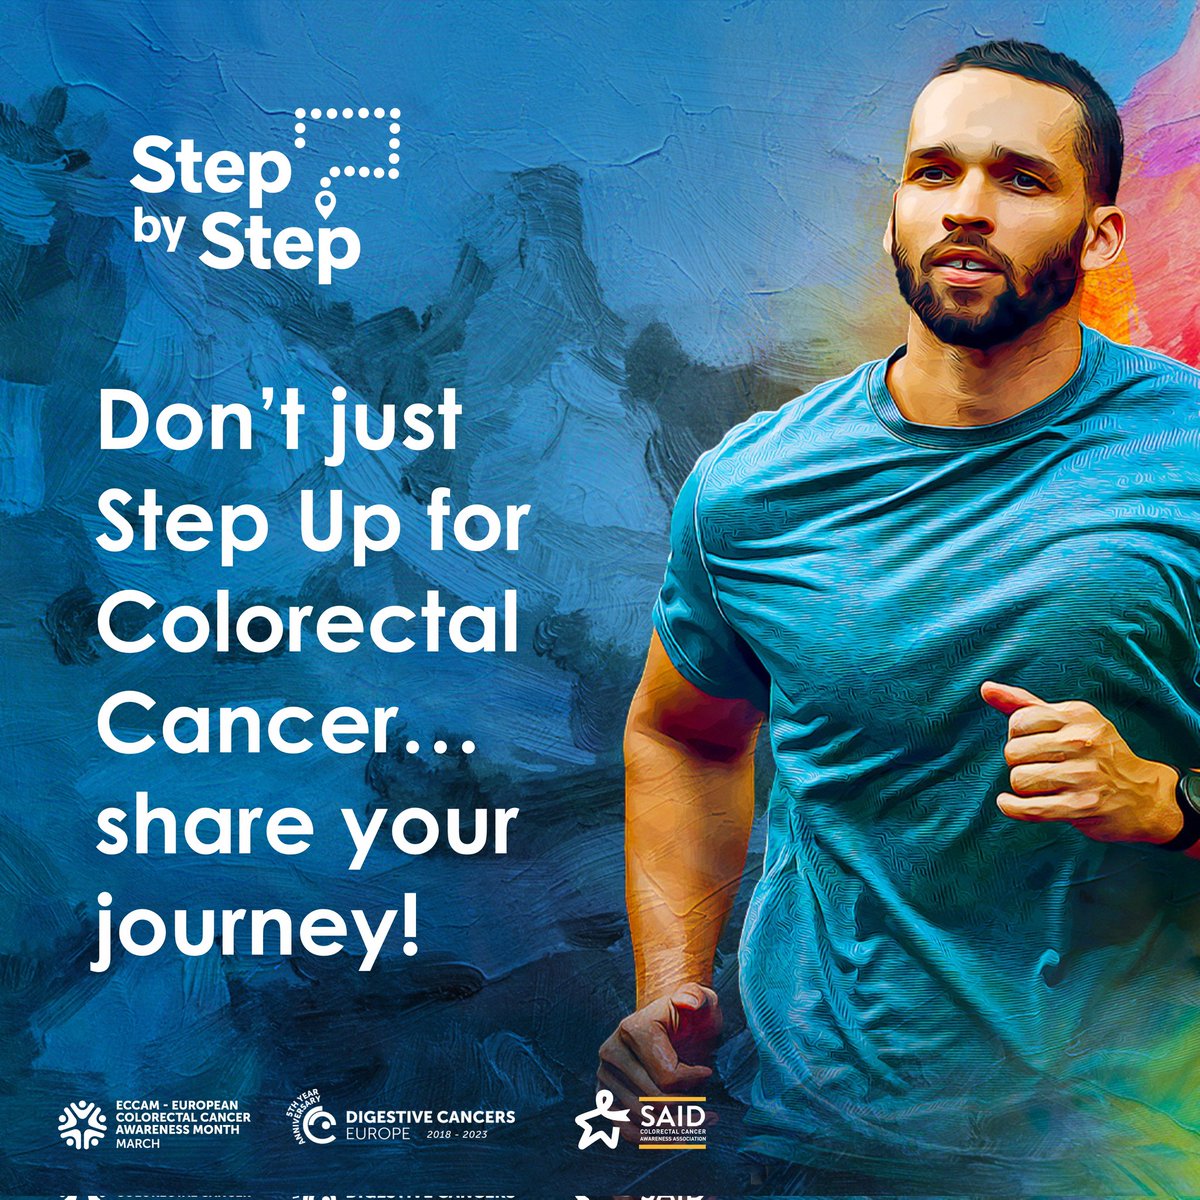 Download DiCE's StepApp before our Walkathon on Sunday March 10 and let's make a difference!

 #StepByStep▶️ eccam.digestivecancers.eu
#ECCAM2024 #StepByStep #StepUpforCRC #healthylifestyle